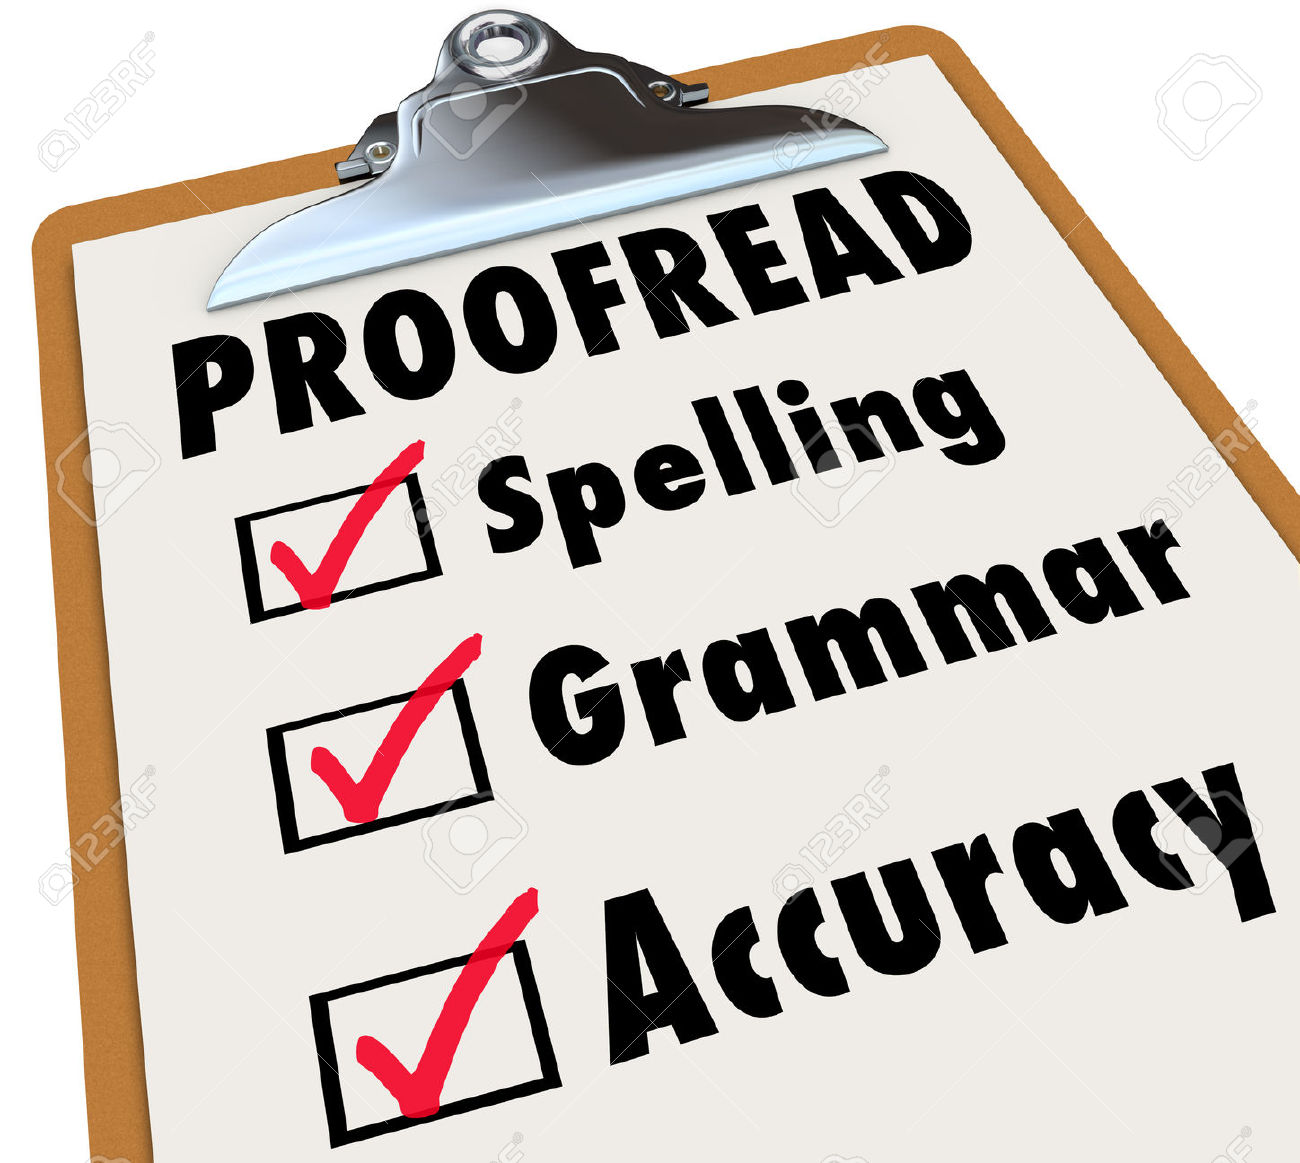 Website proofreading services